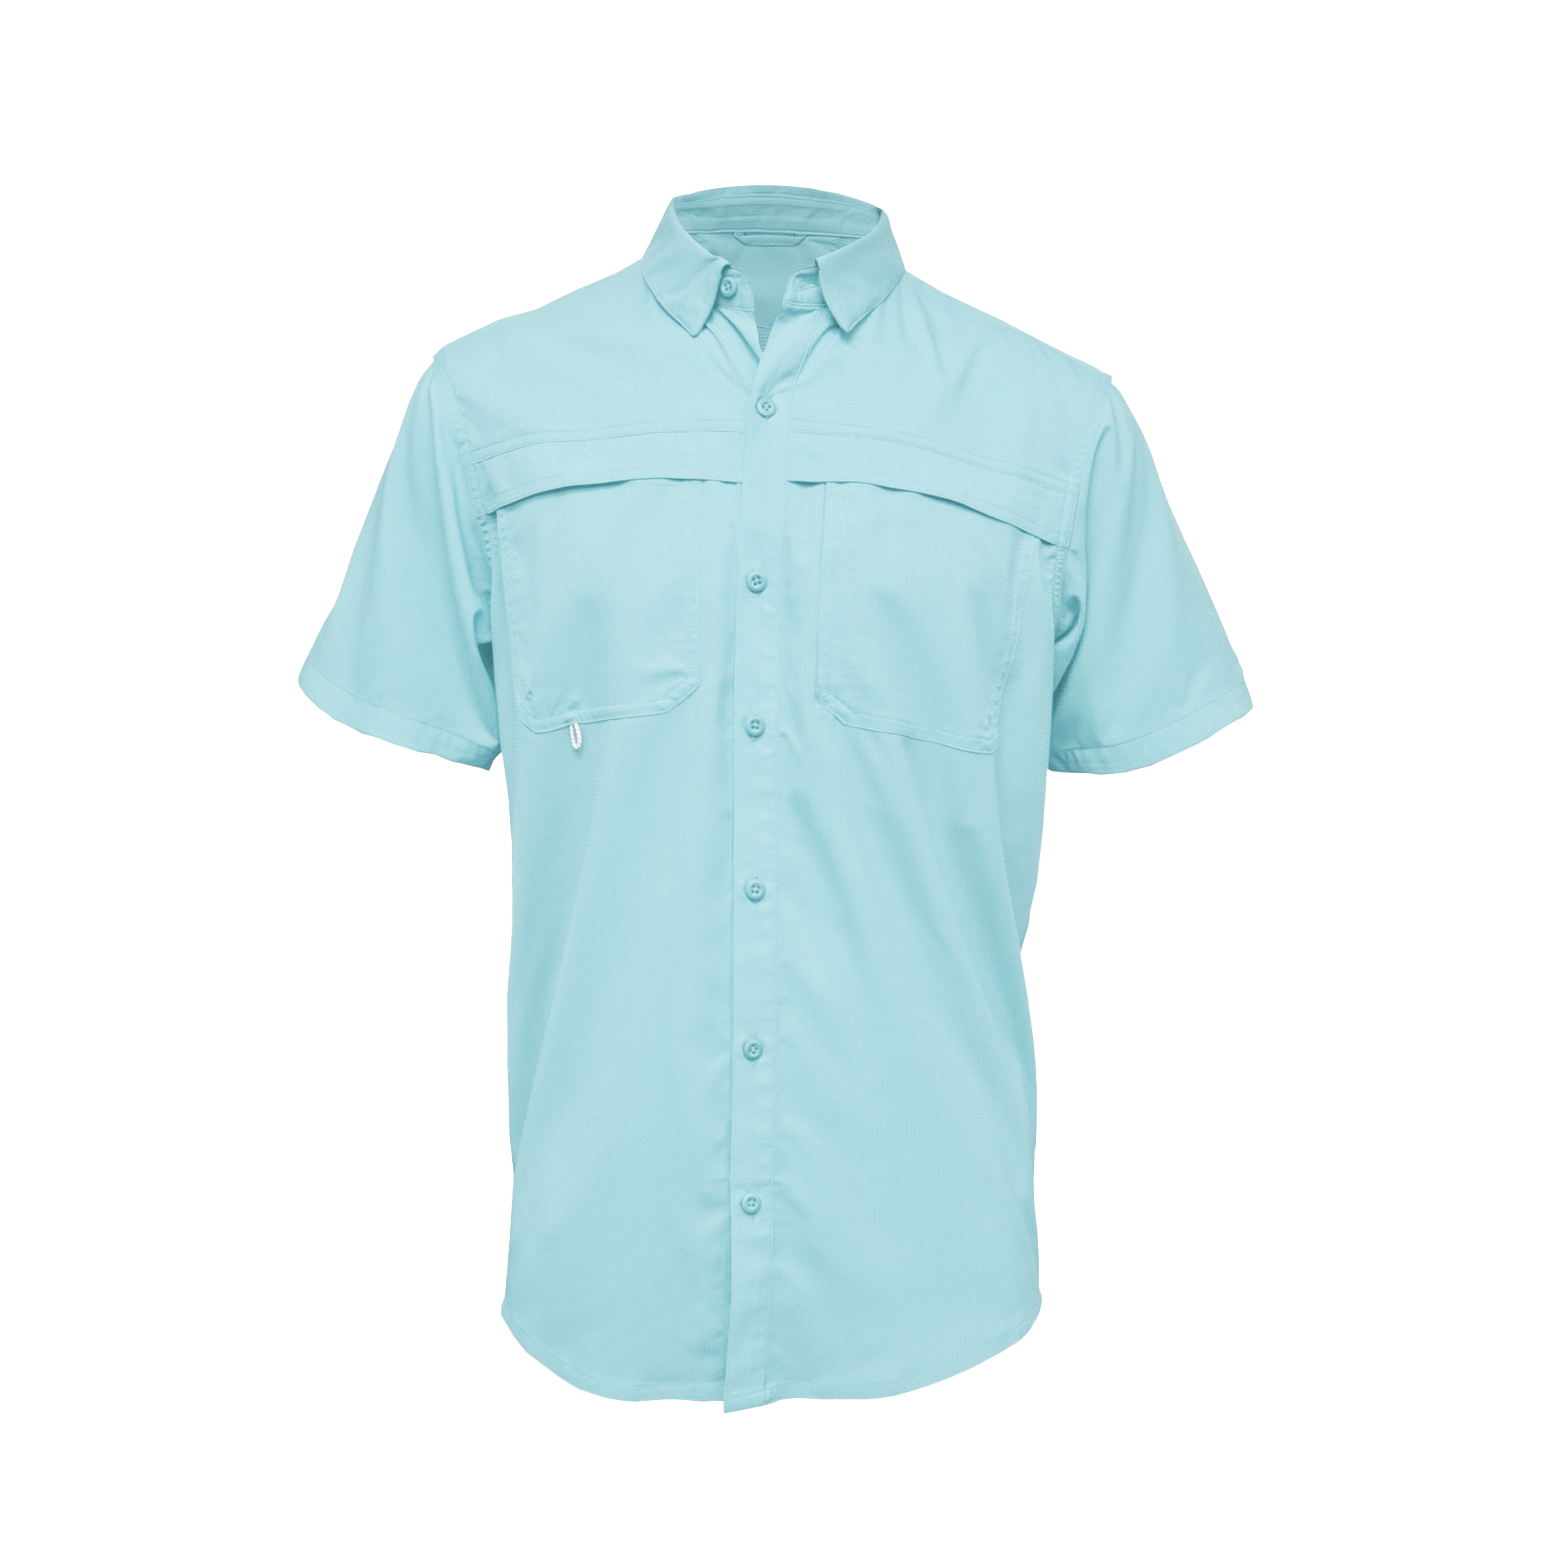 Intracoastal Short Sleeve Fishing Shirt by Natural Gear - Size S, Light Blue